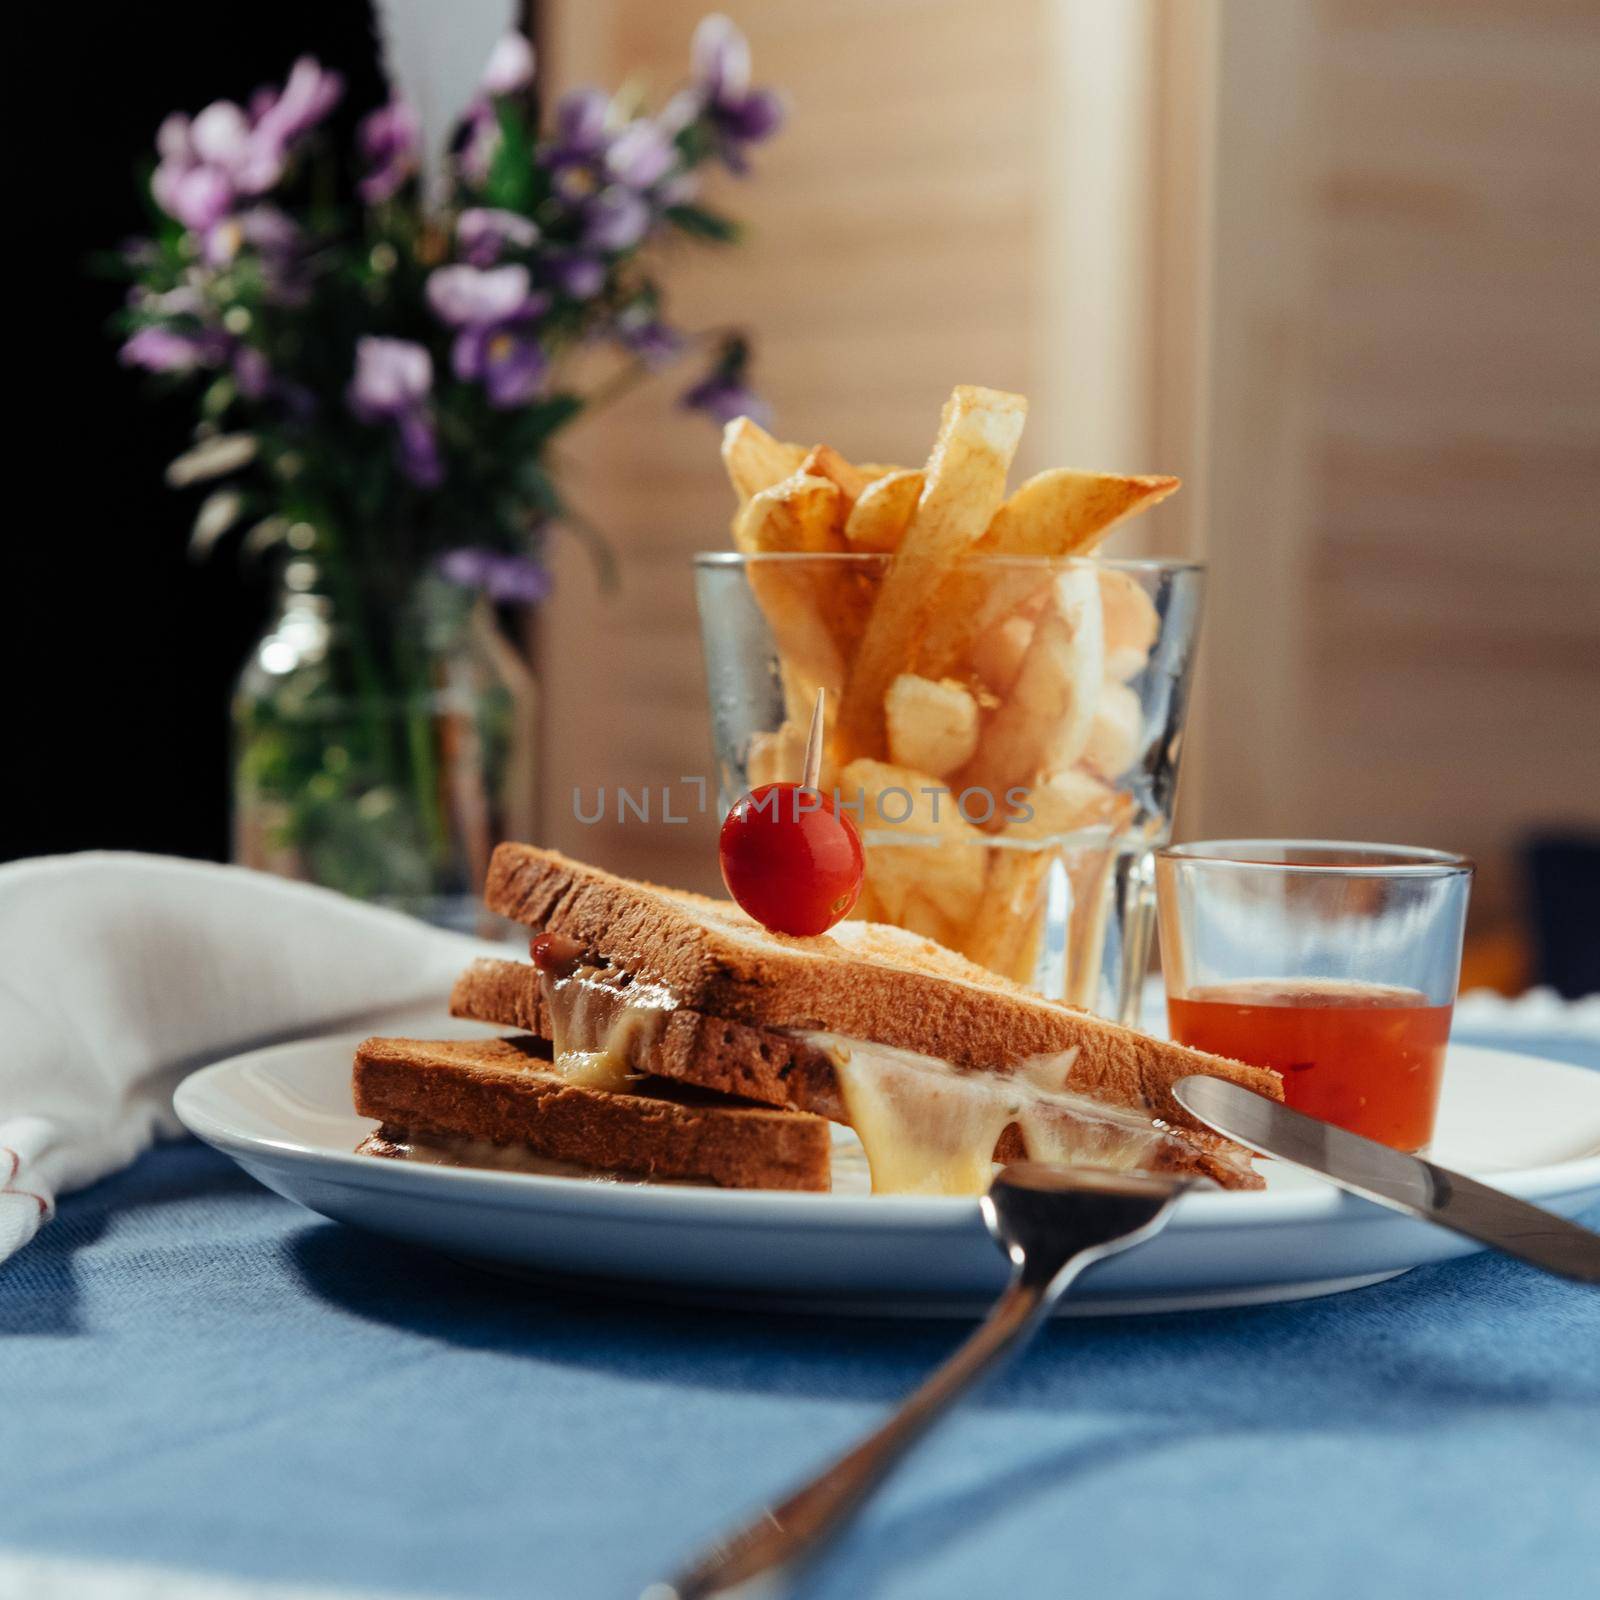 Grilled cheese sandwich and fries. Advertising shooting menu